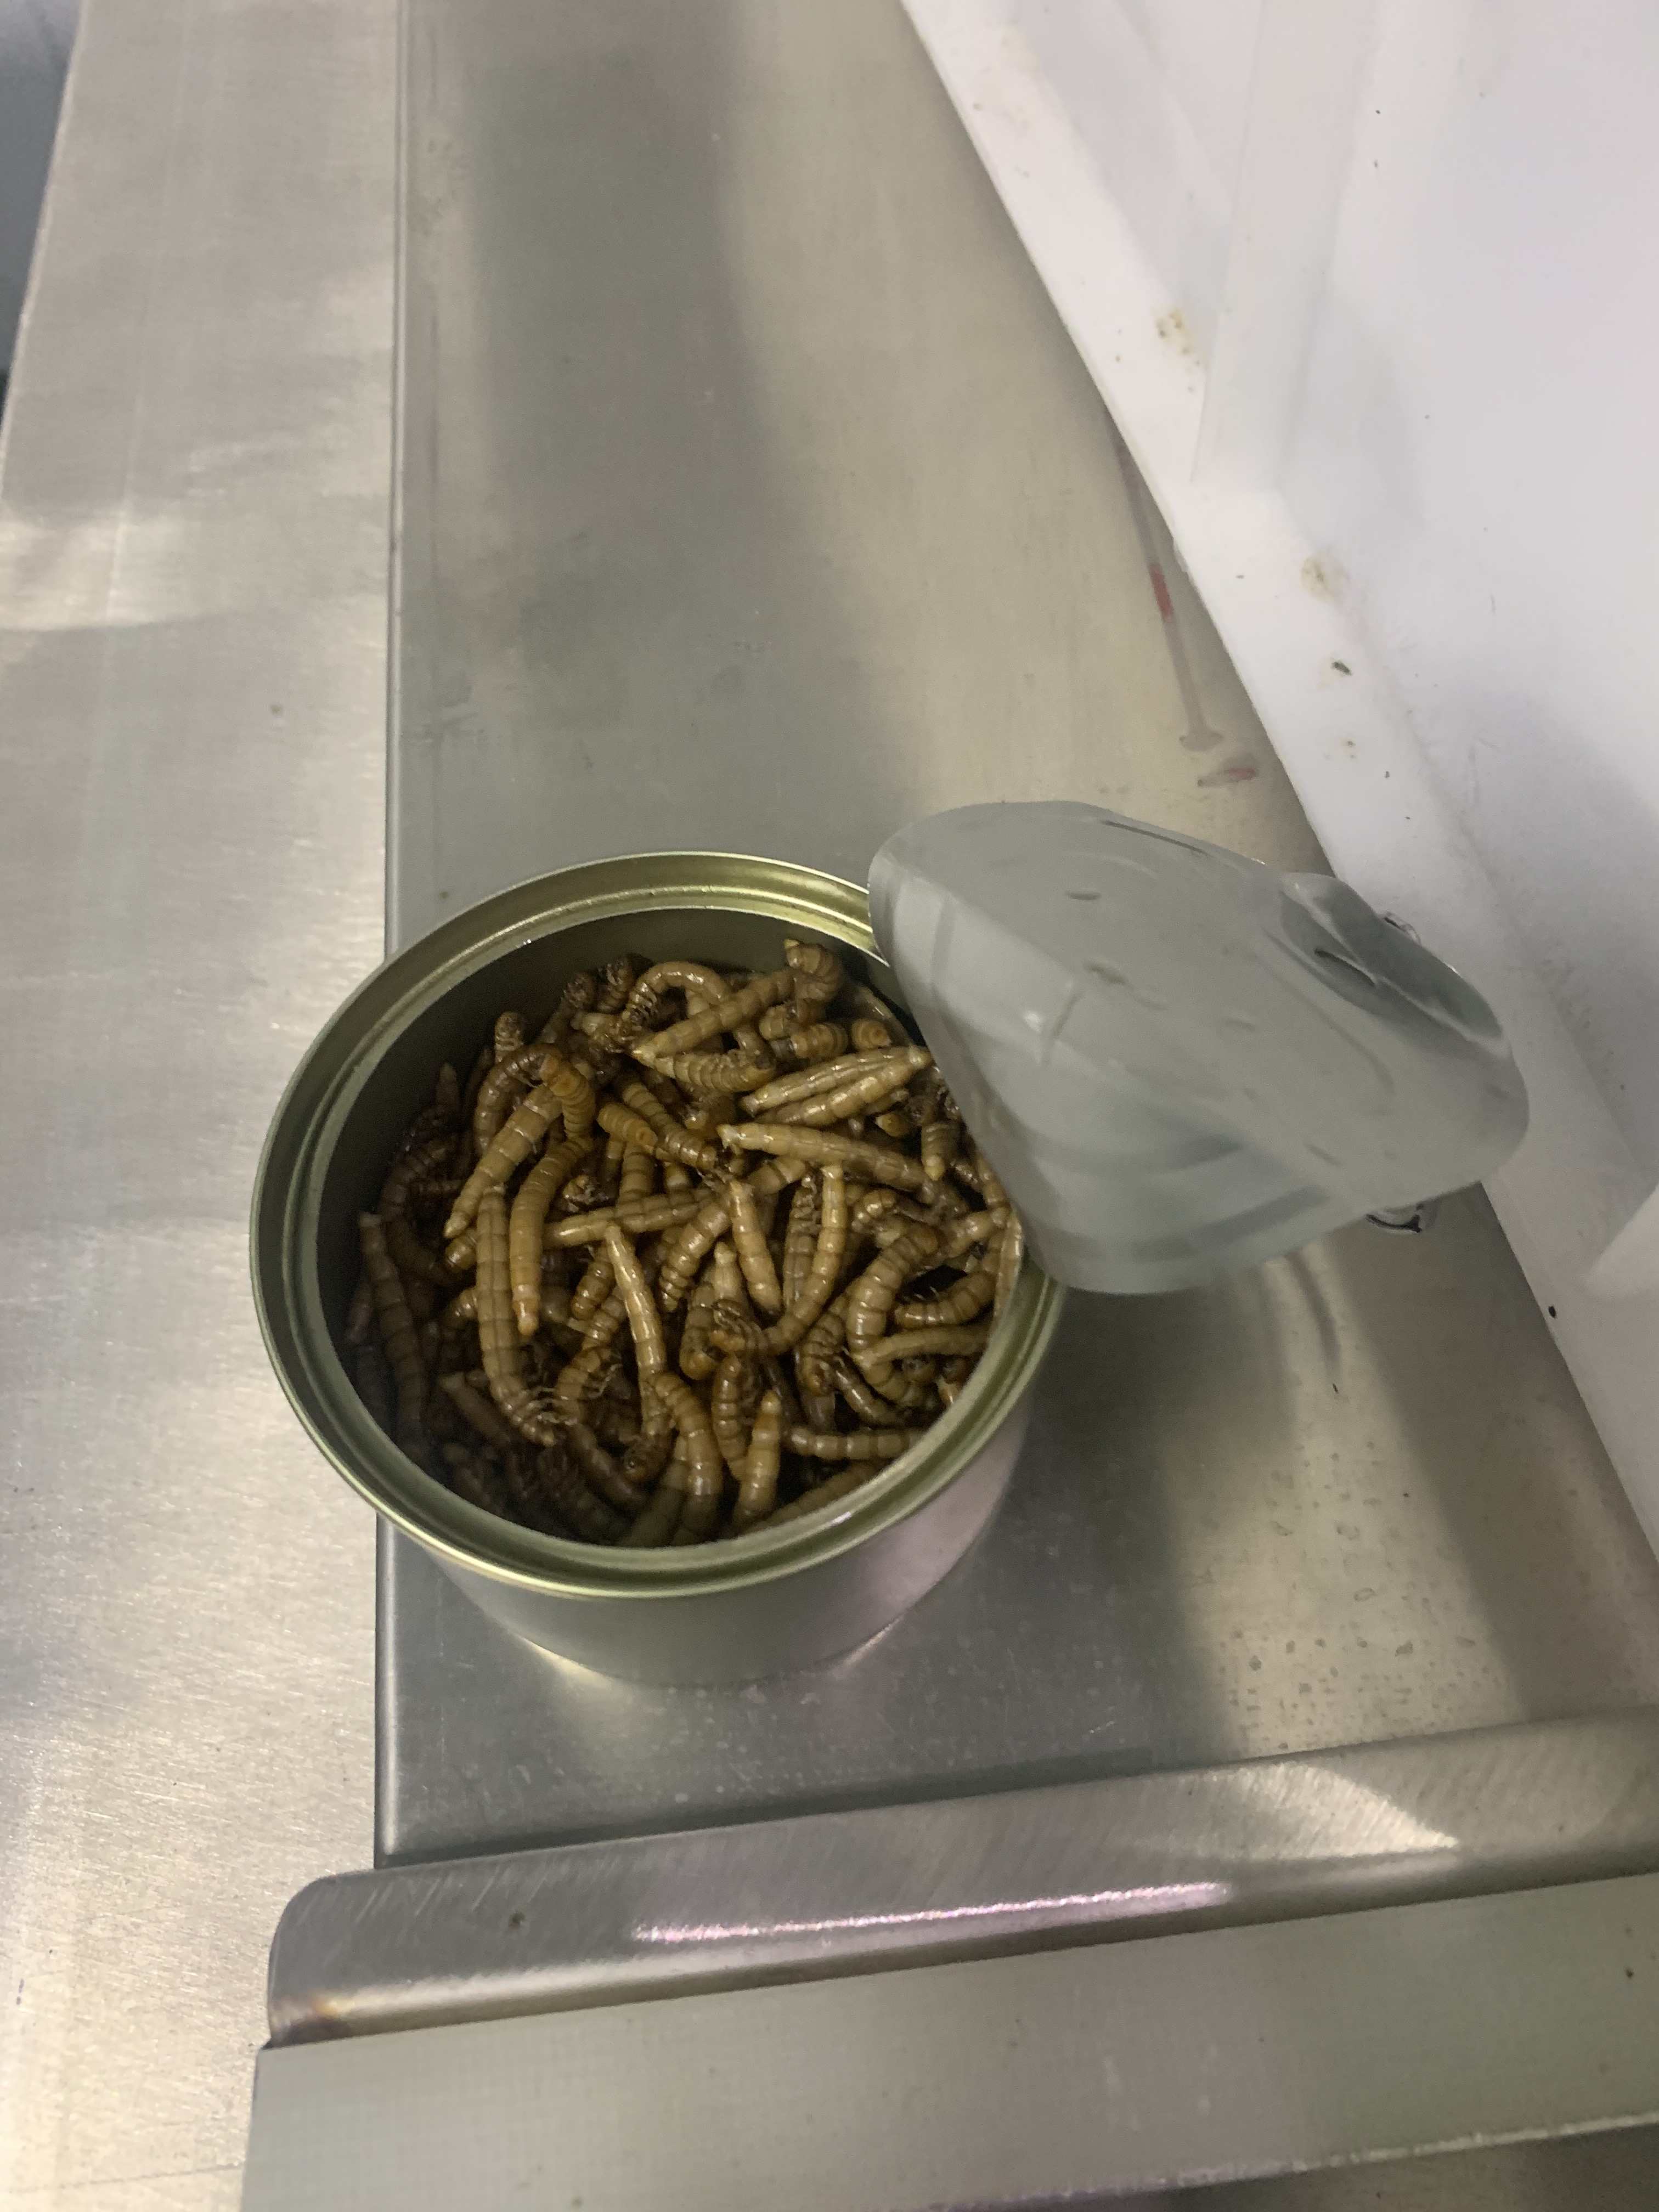 Fresh mealworms